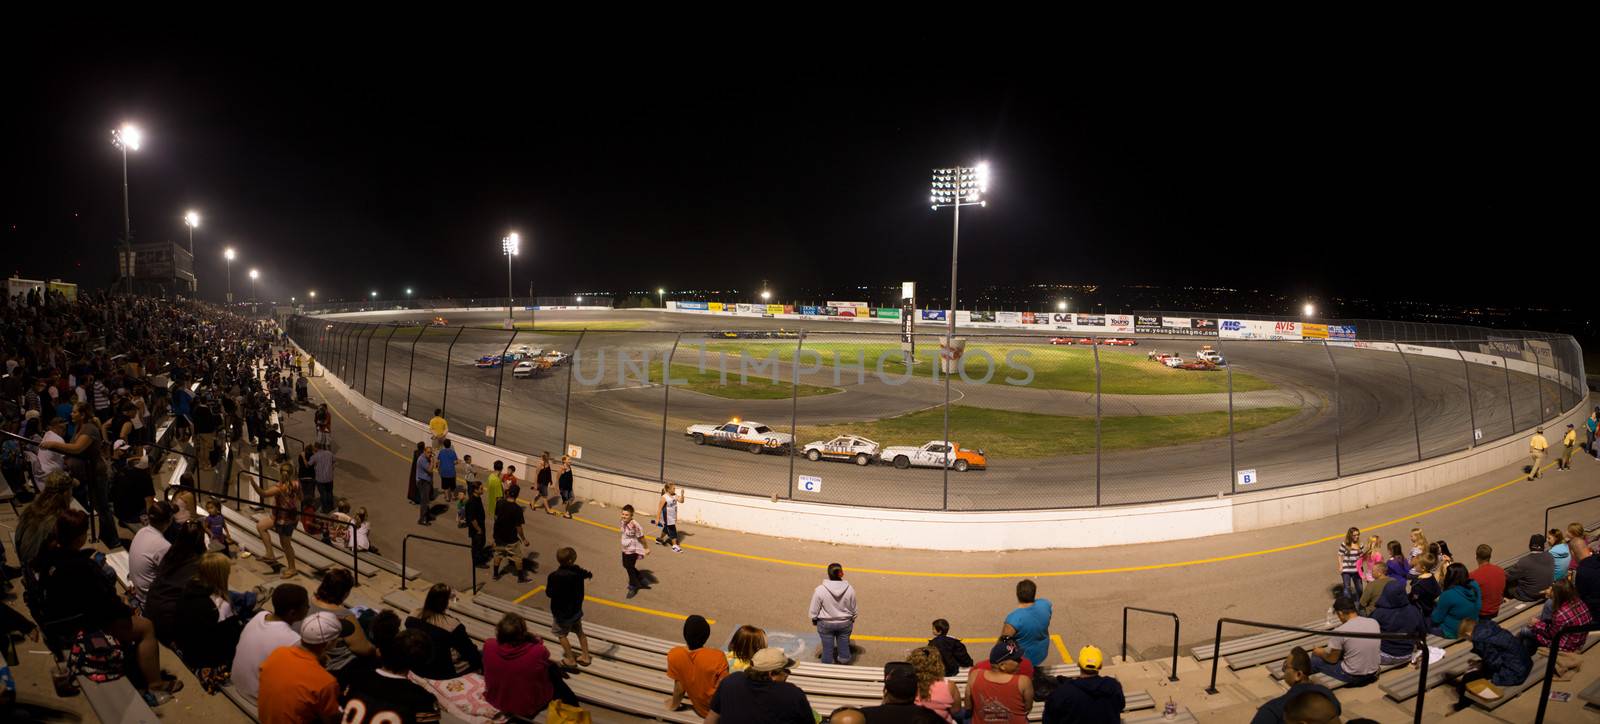 SALT LAKE CITY, NV, SEPTEMBER 9: Unidentified people watchting a stock car competition at night in a race track statium, Salt Lake City, Utah. The actual race is based on three car team, called the small train. September 9, 2013.